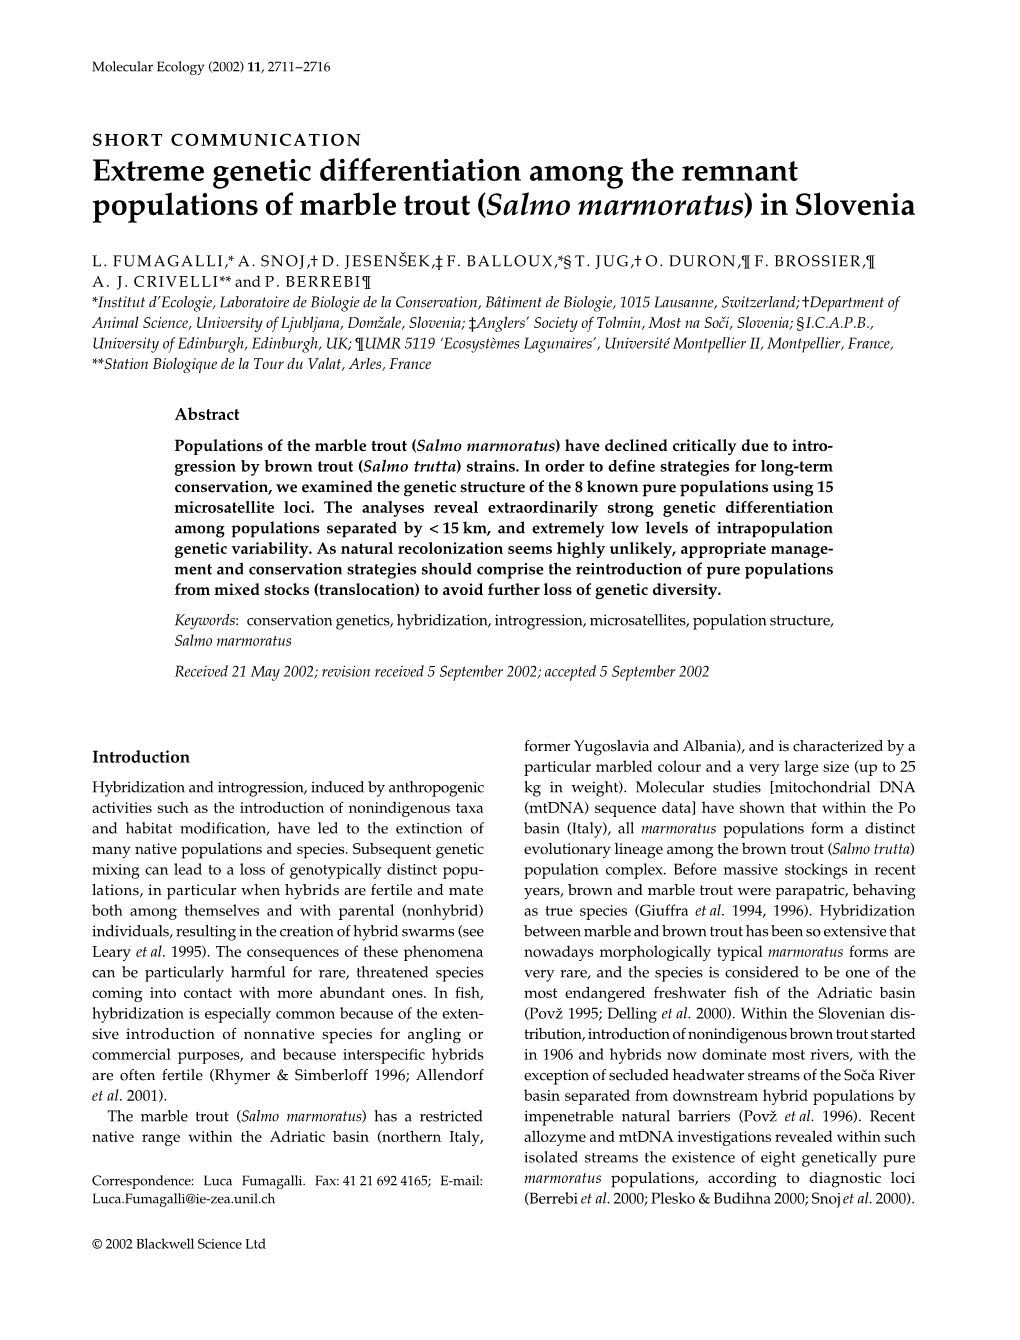 Extreme Genetic Differentiation Among the Remnant Populations of Marble Trout (Salmo Marmoratus) in Slovenia